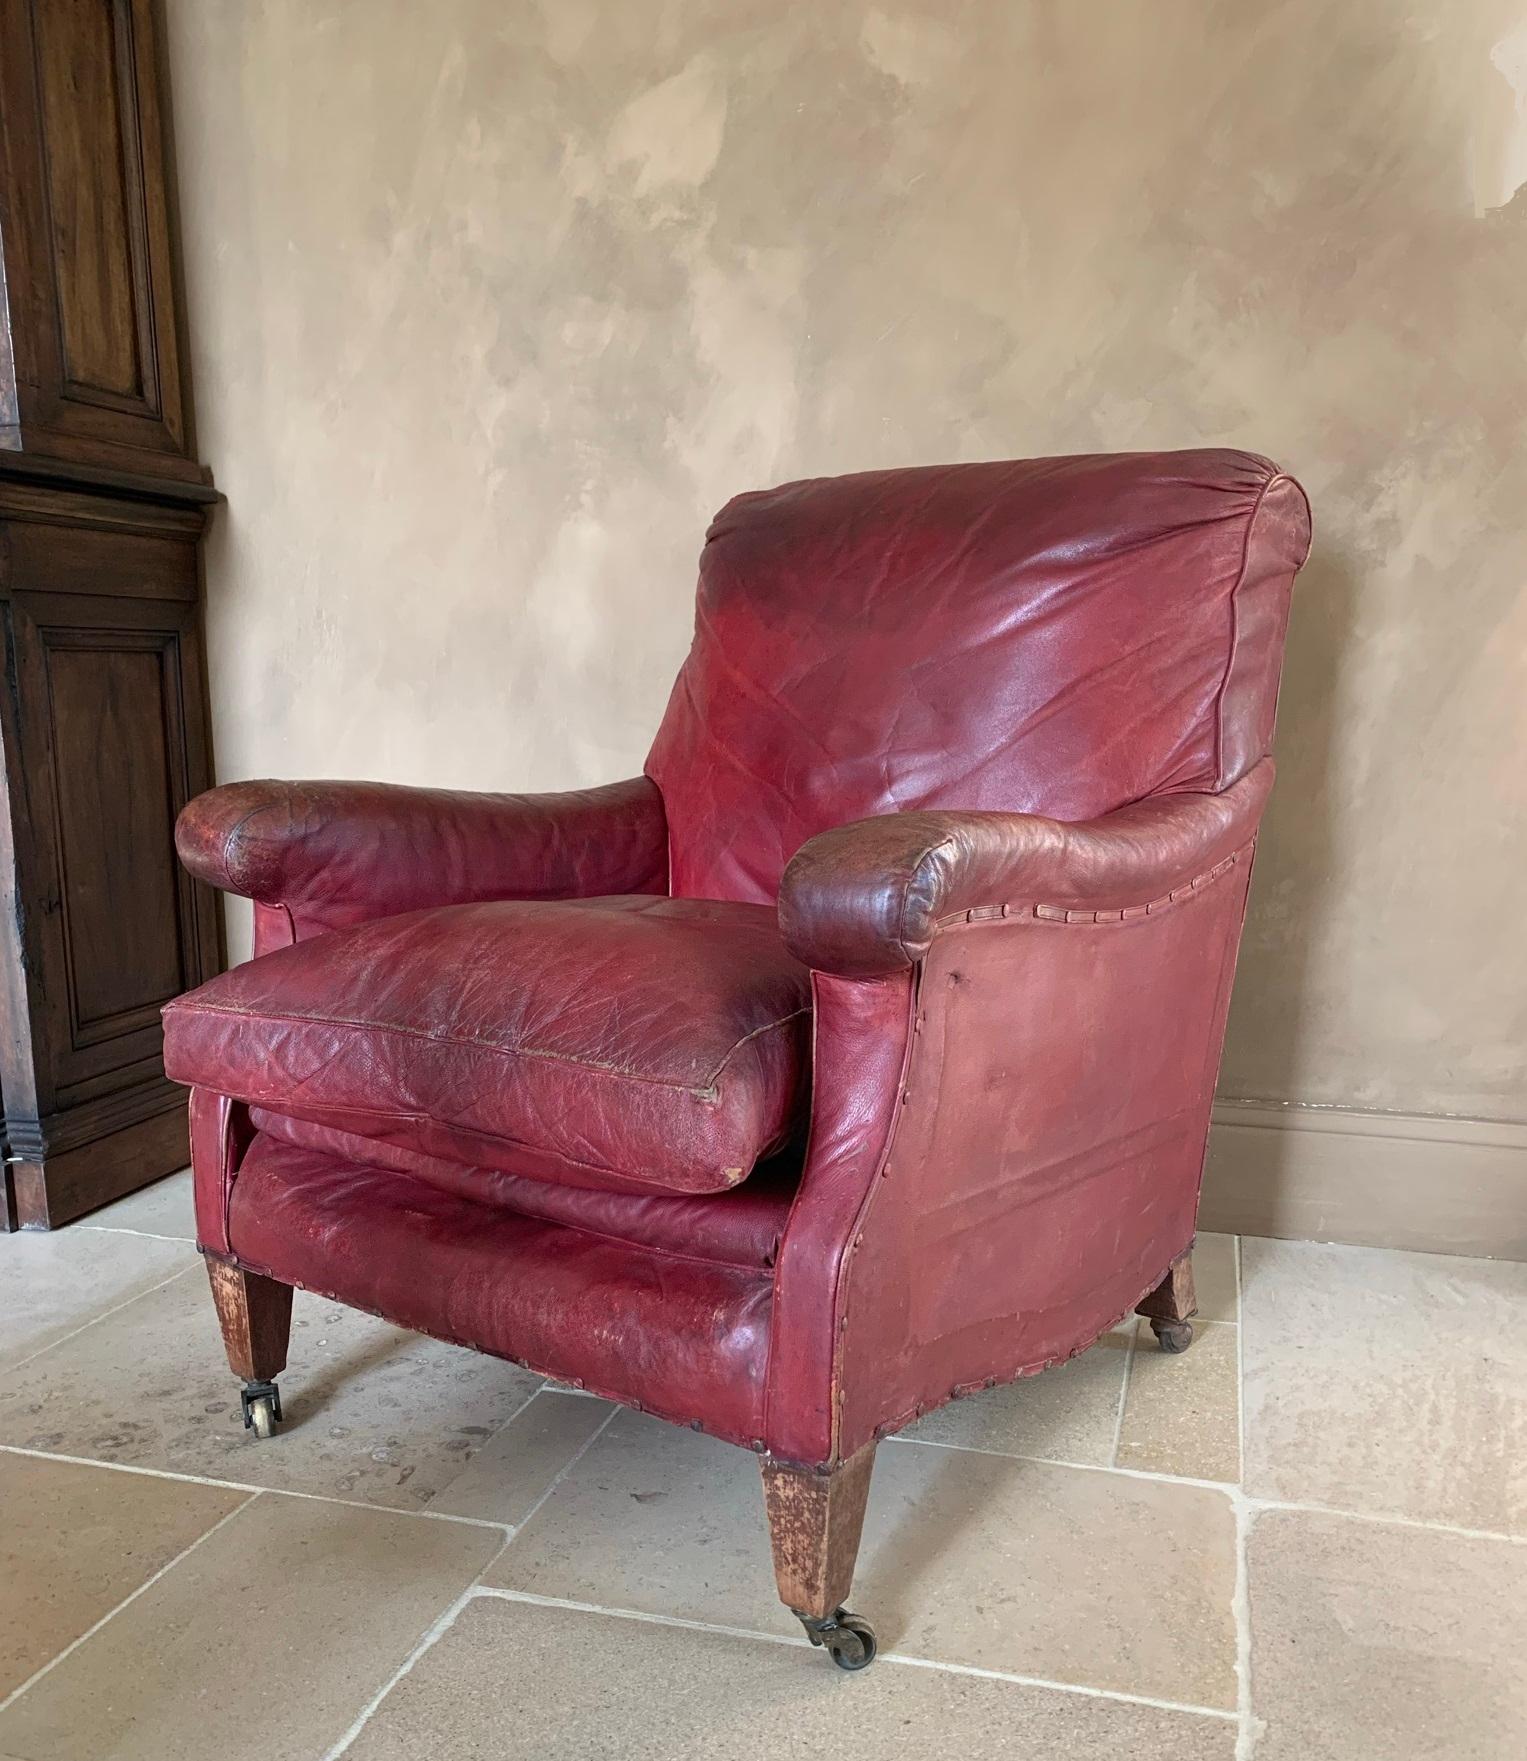 A great leather clubchair. We preserved the beautiful patina of this chair while restoring the springs and bands to ensure comfort. The burgundy red leather was waxed.